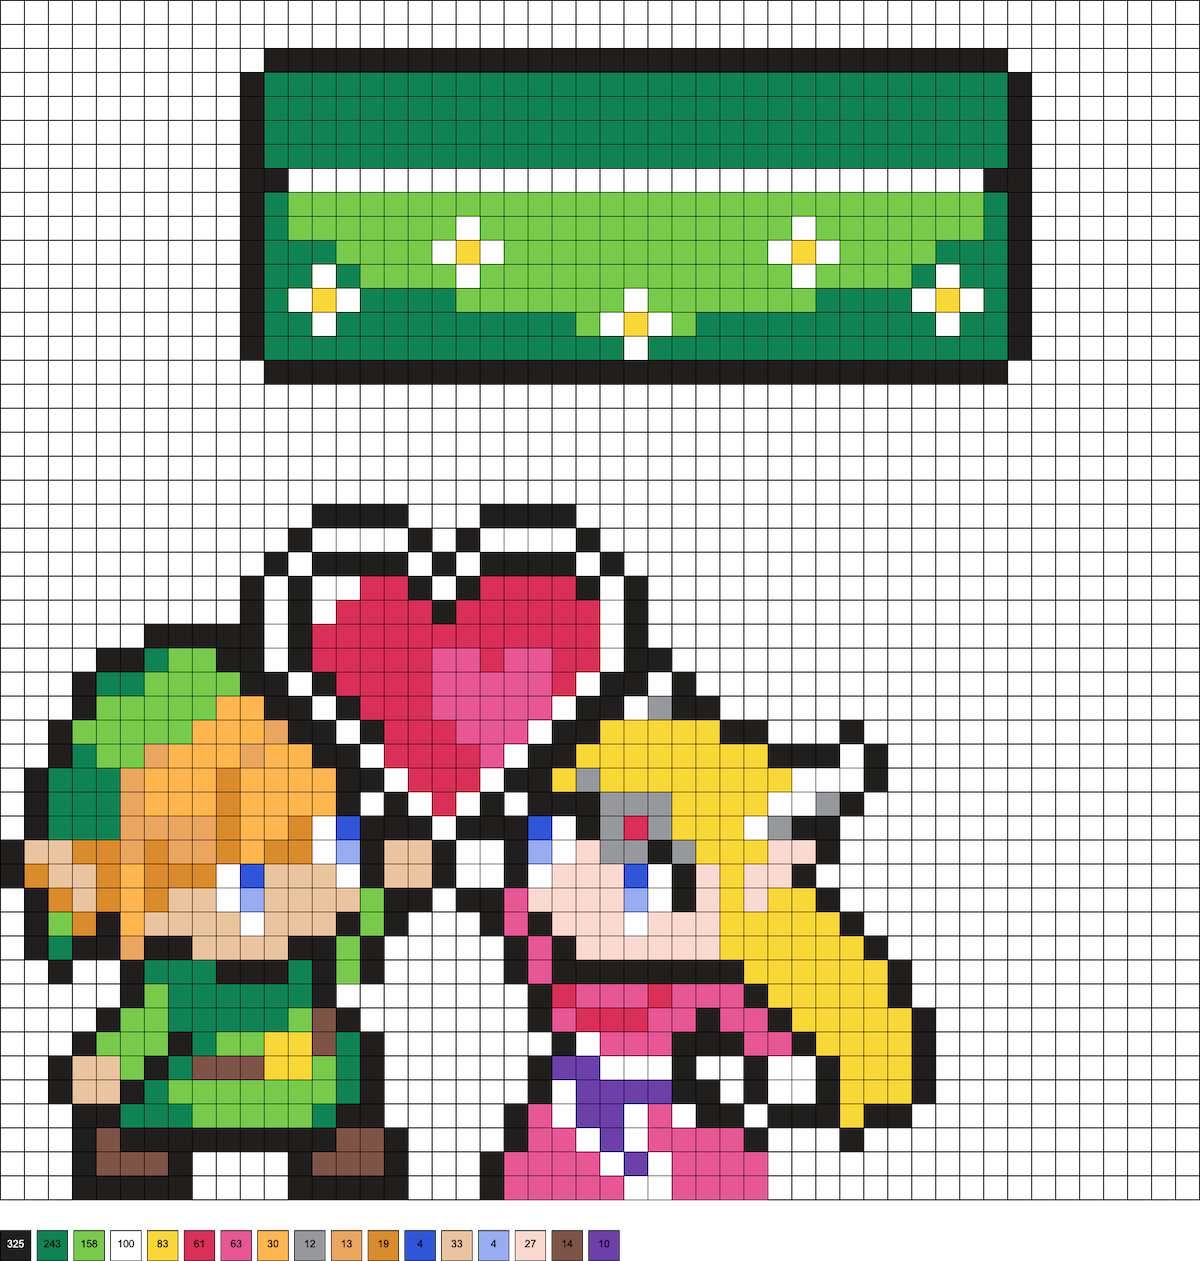 link and princess standing pattern